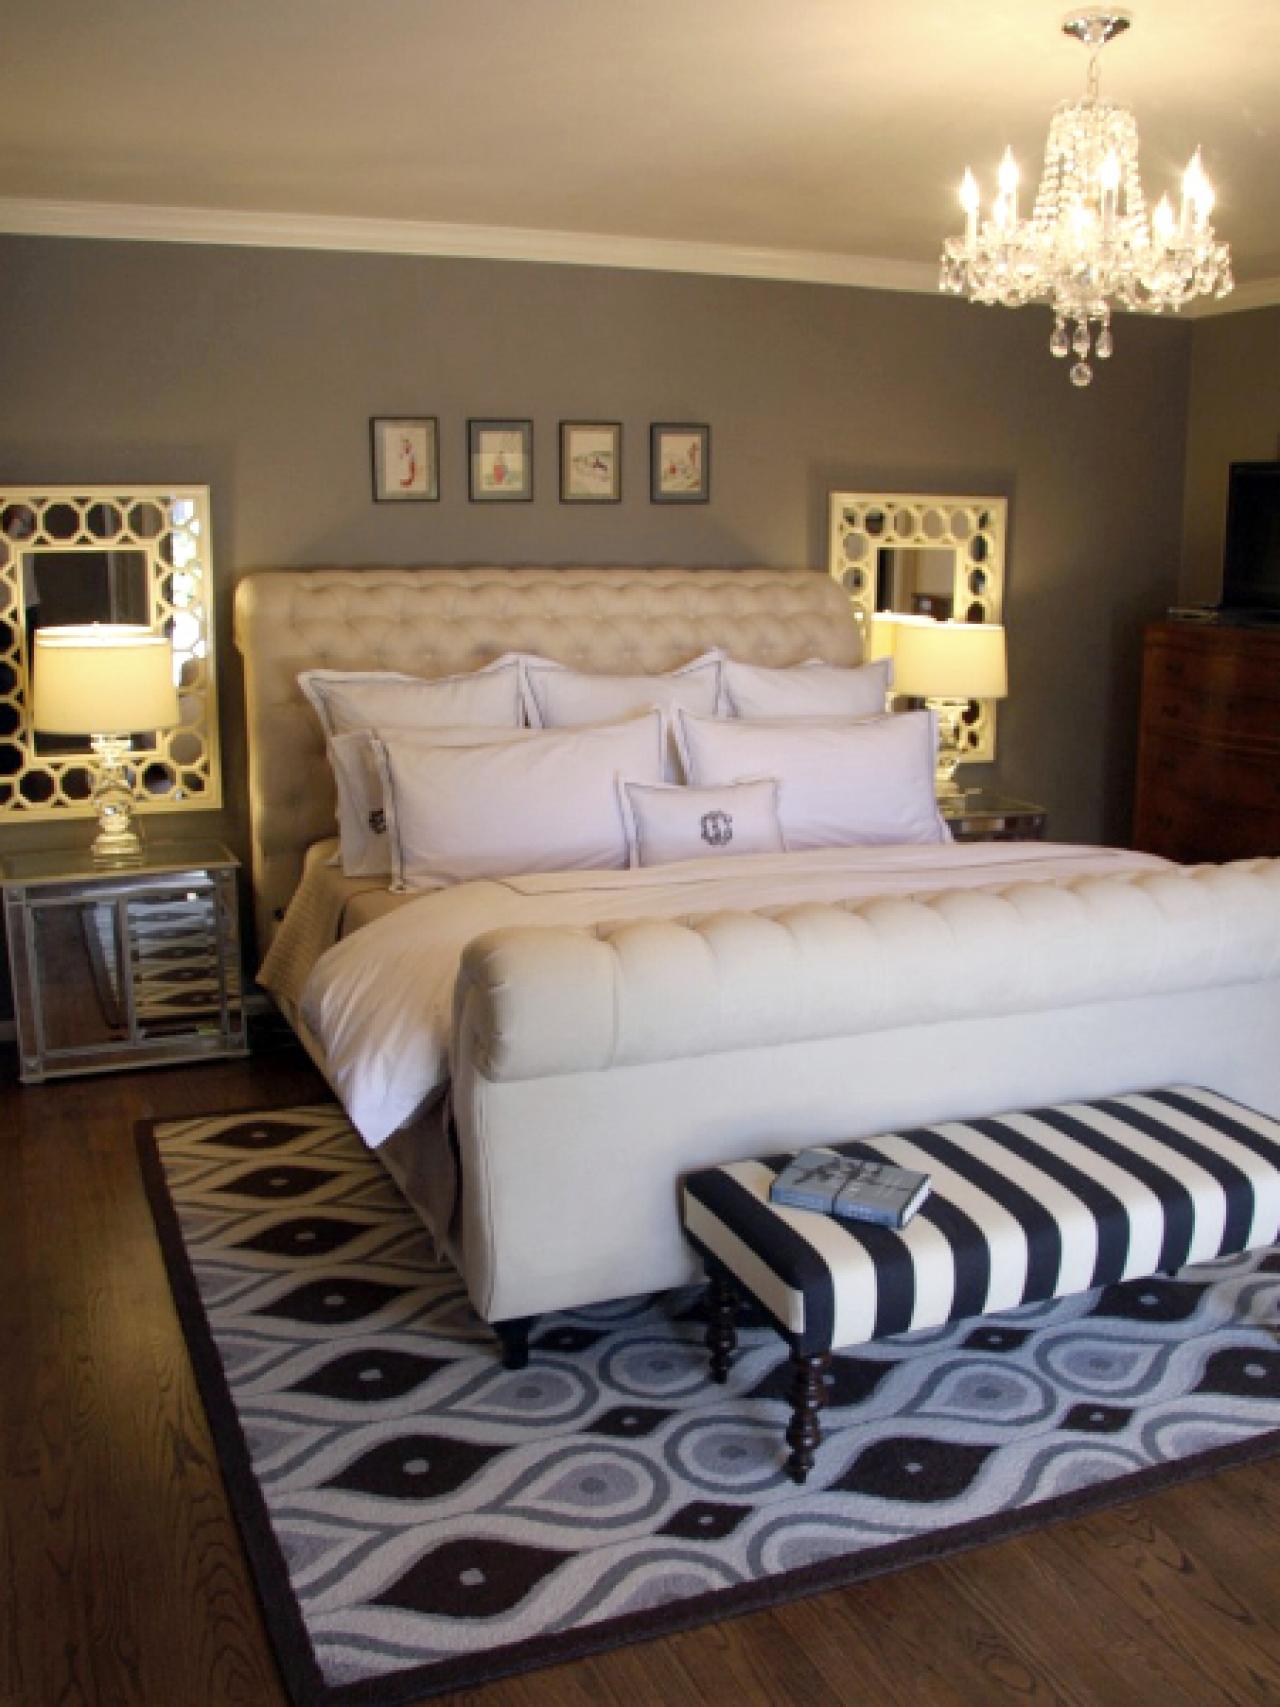 Designing the Bedroom as a Couple | HGTV's Decorating ...